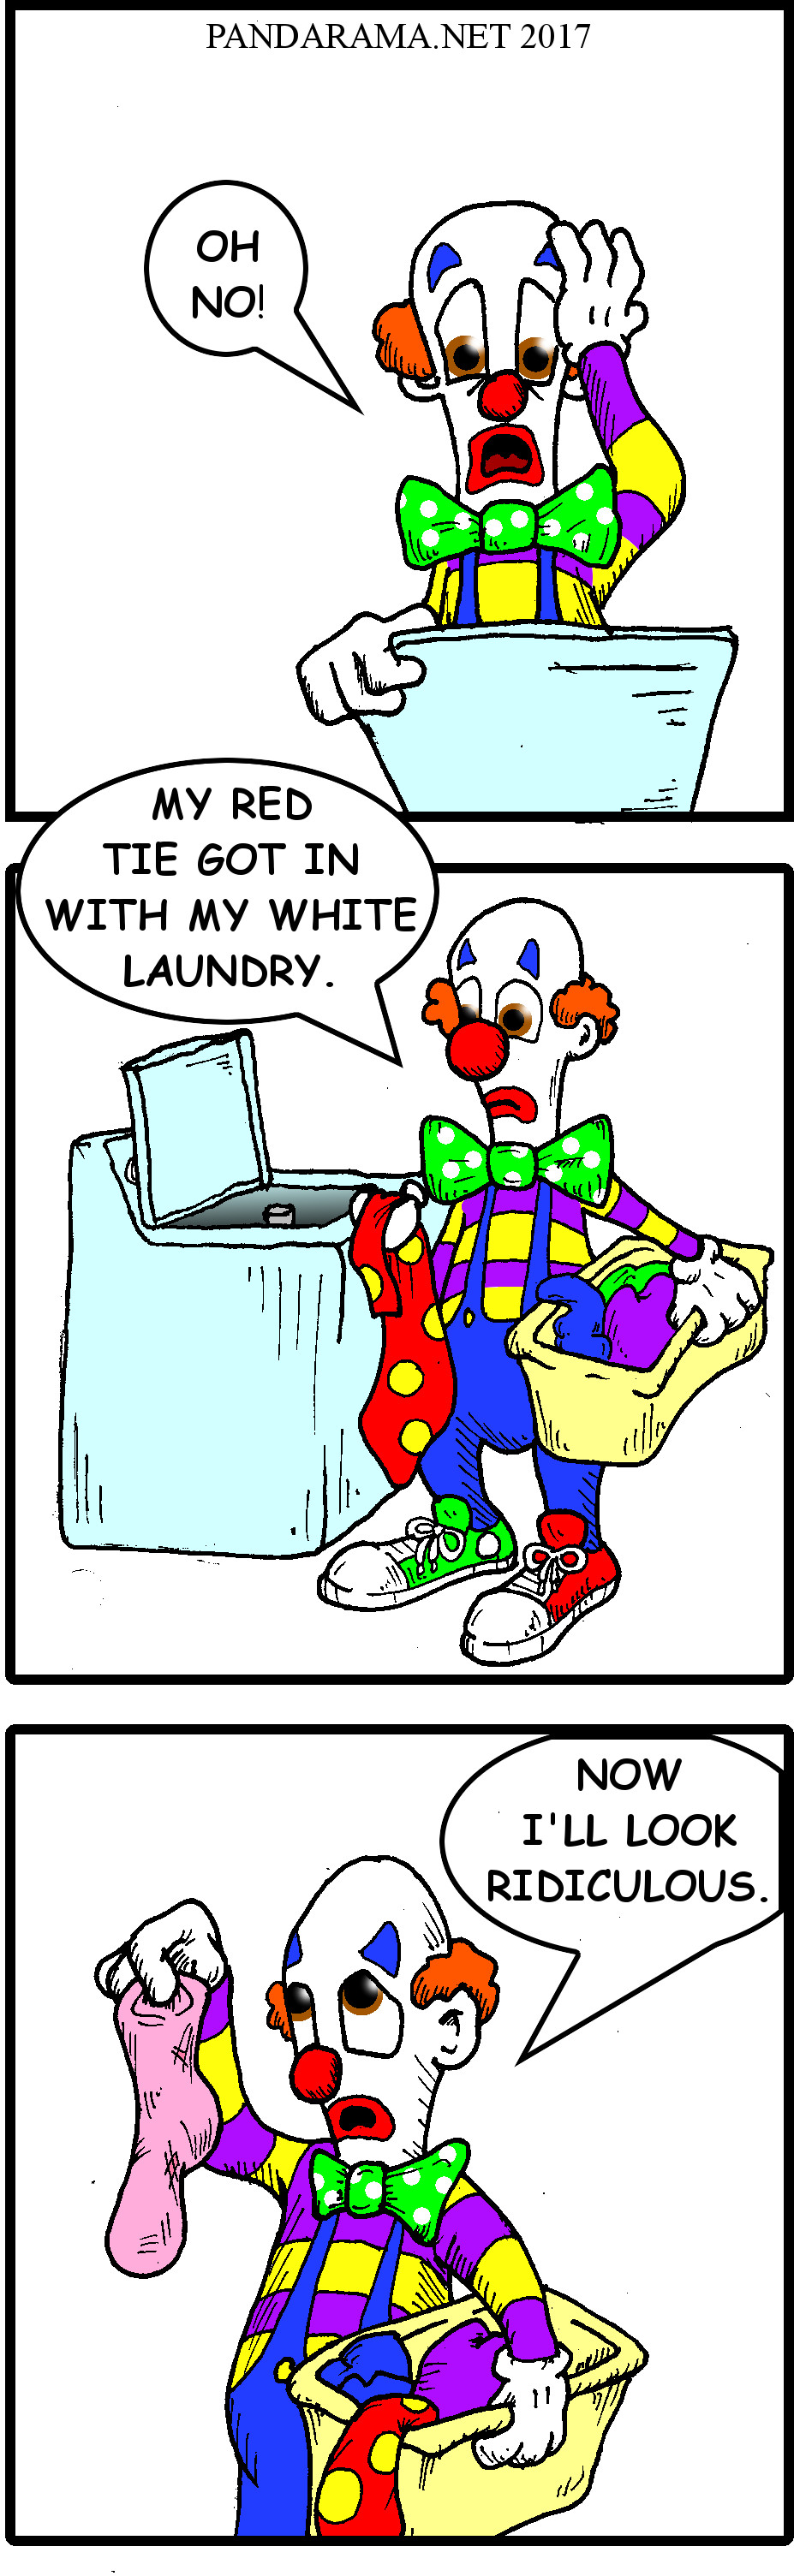 clown accidentally turns white laundry pink, and is now upset that he'll look ridiculous. pink laundry cartoon. laundry comic. cartoon clown.